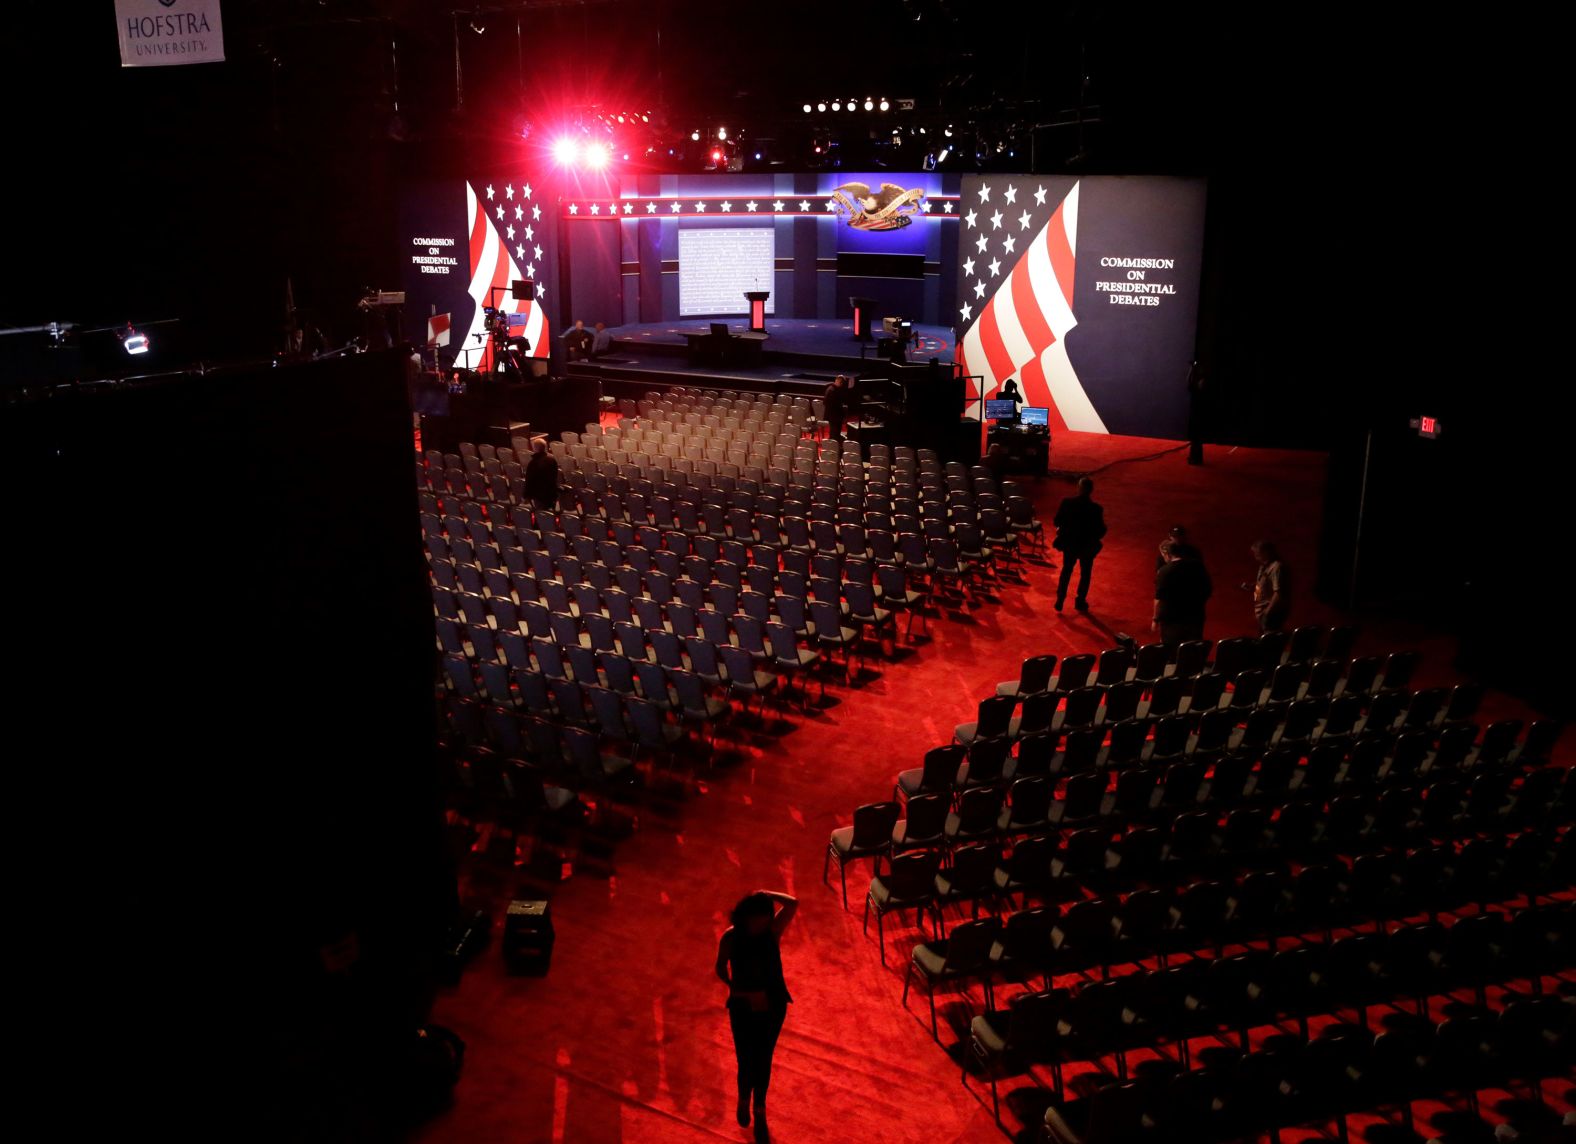 Workers at Hofstra University prepare the stage for a presidential debate between Hillary Clinton and Donald Trump in Hempstead, New York, in 2016. A record 84 million people watched the debate.